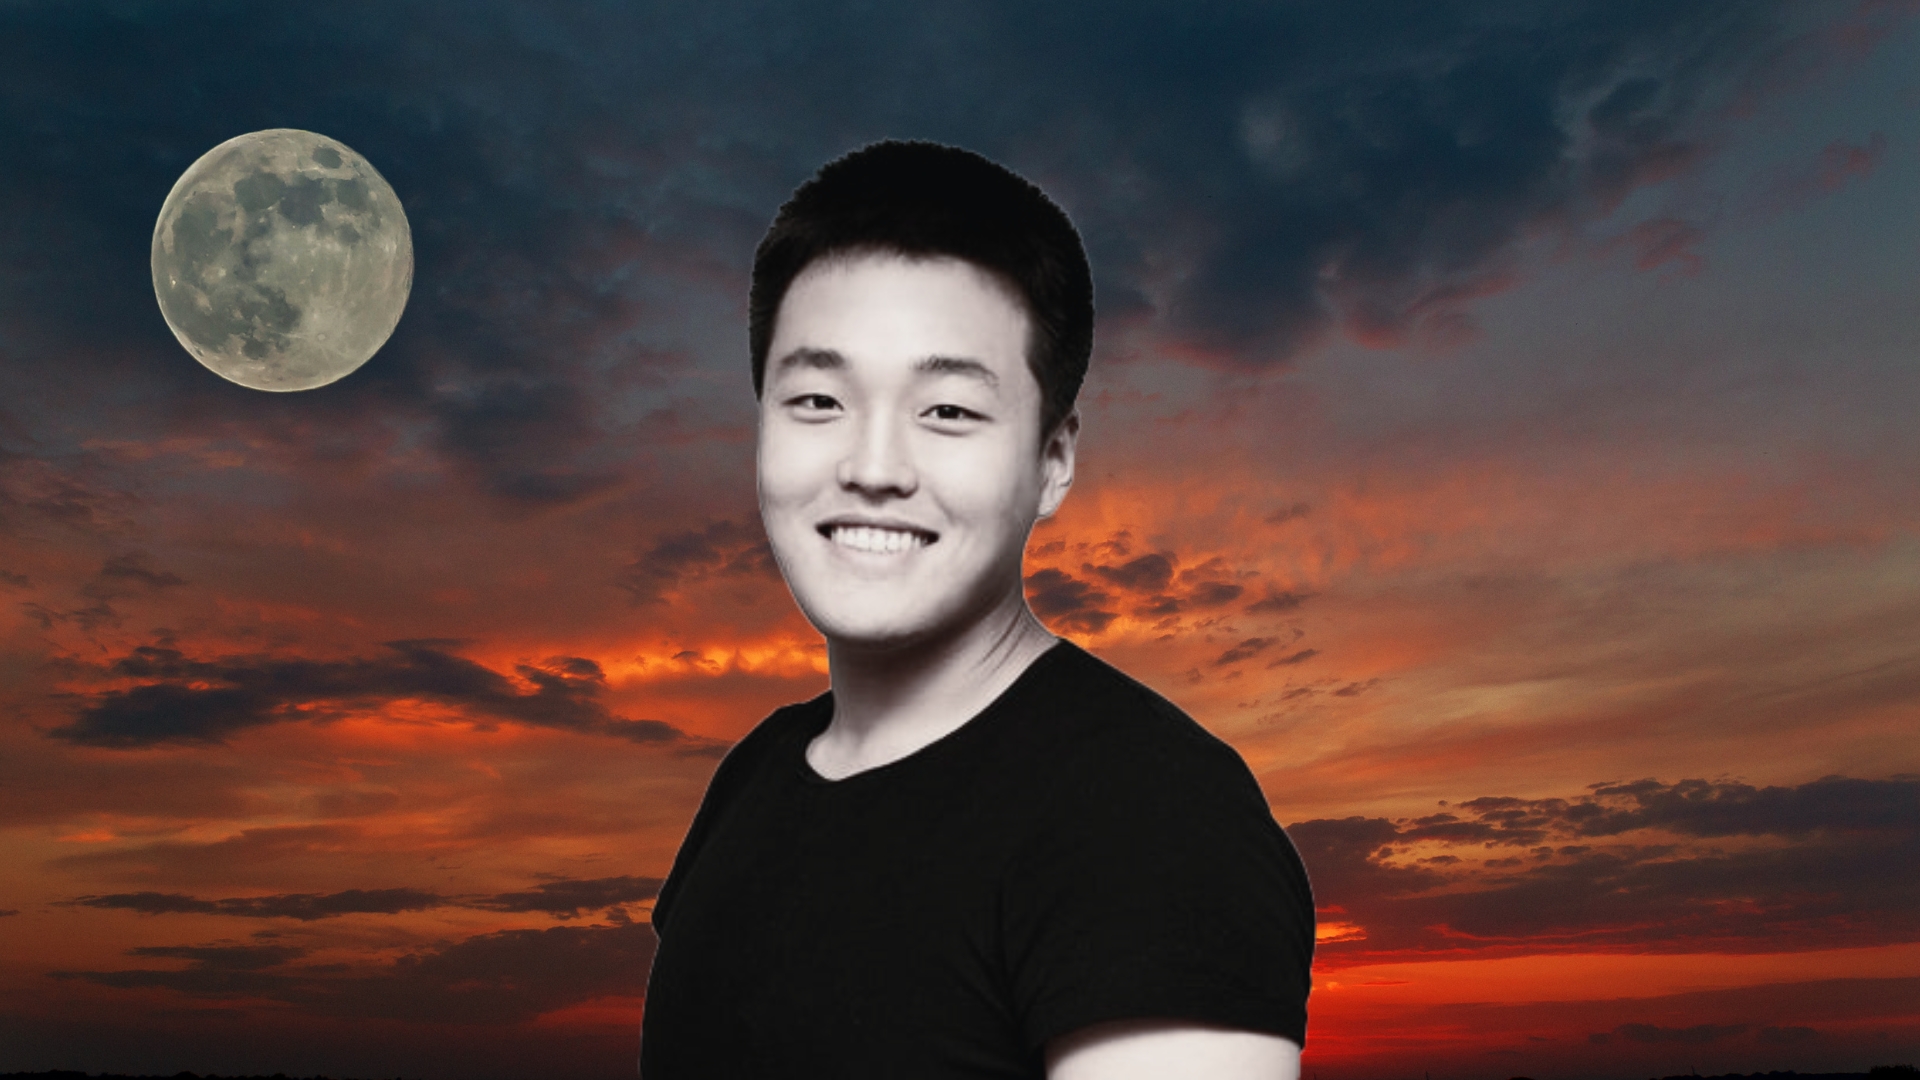 Terraform Labs chief Do Kwon in front of red sky with moon image